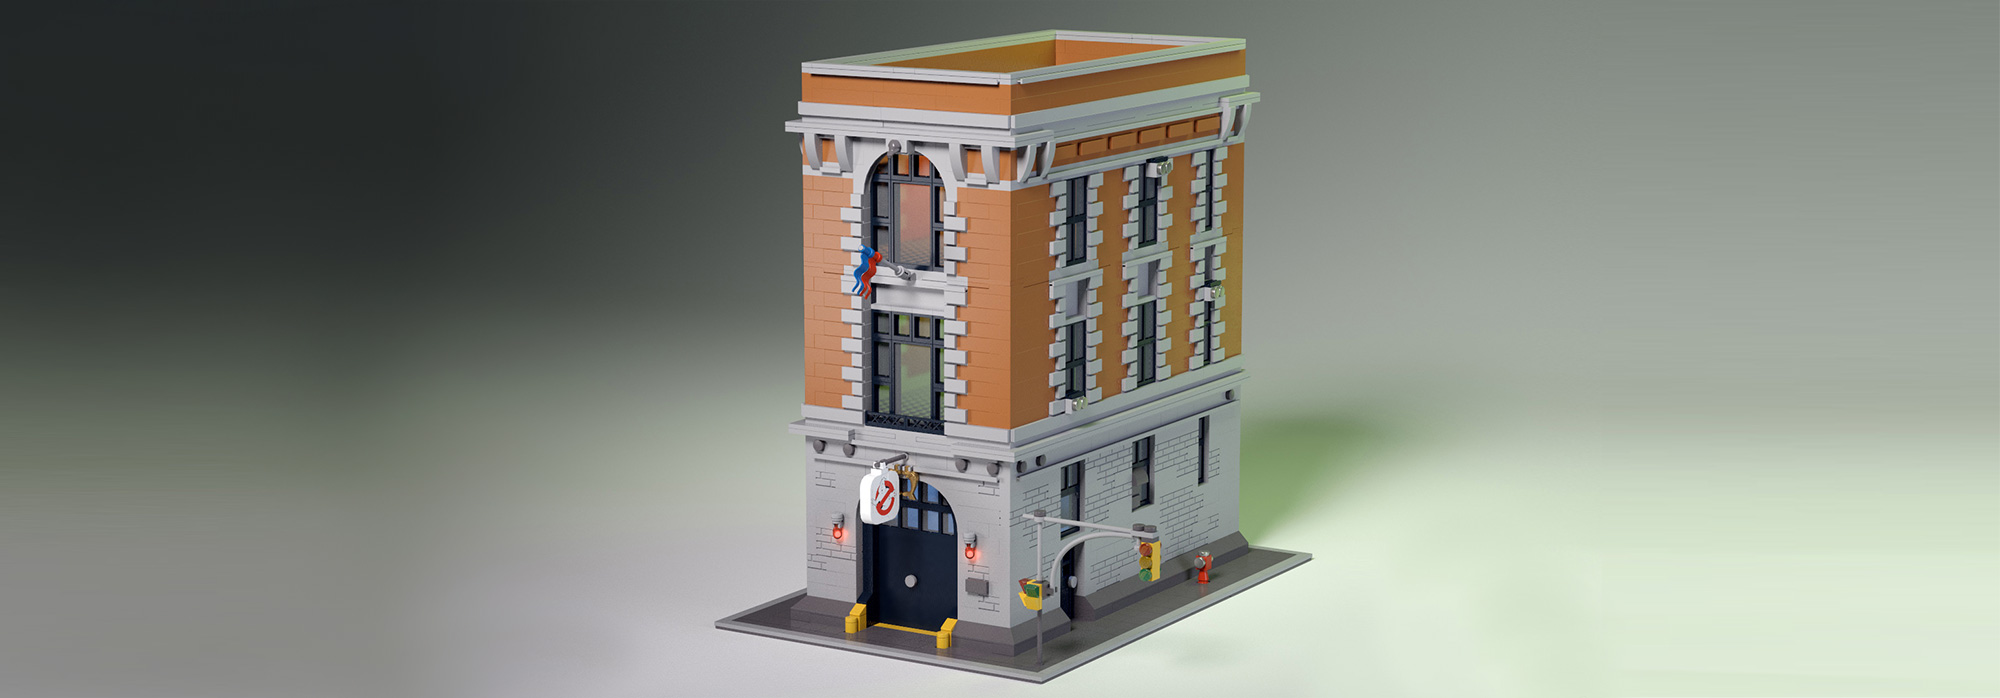 lego ghostbusters headquarters